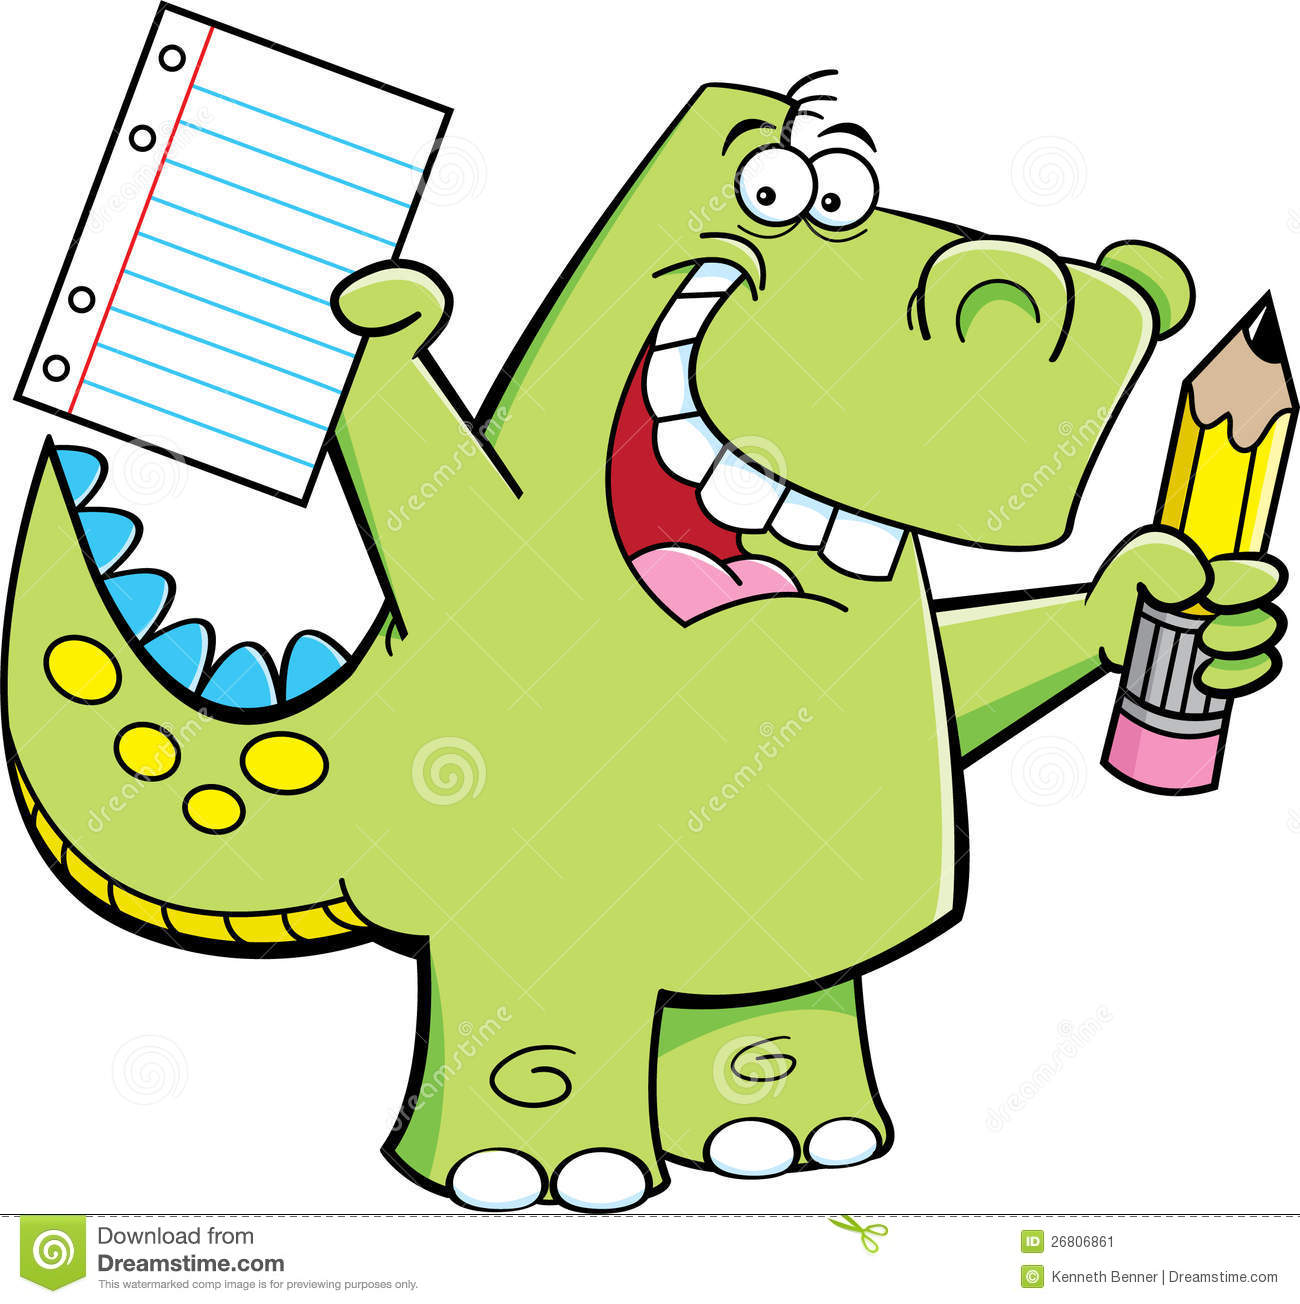 Cartoon Illustration Of A Dinosaur Holding A Pencil And Paper